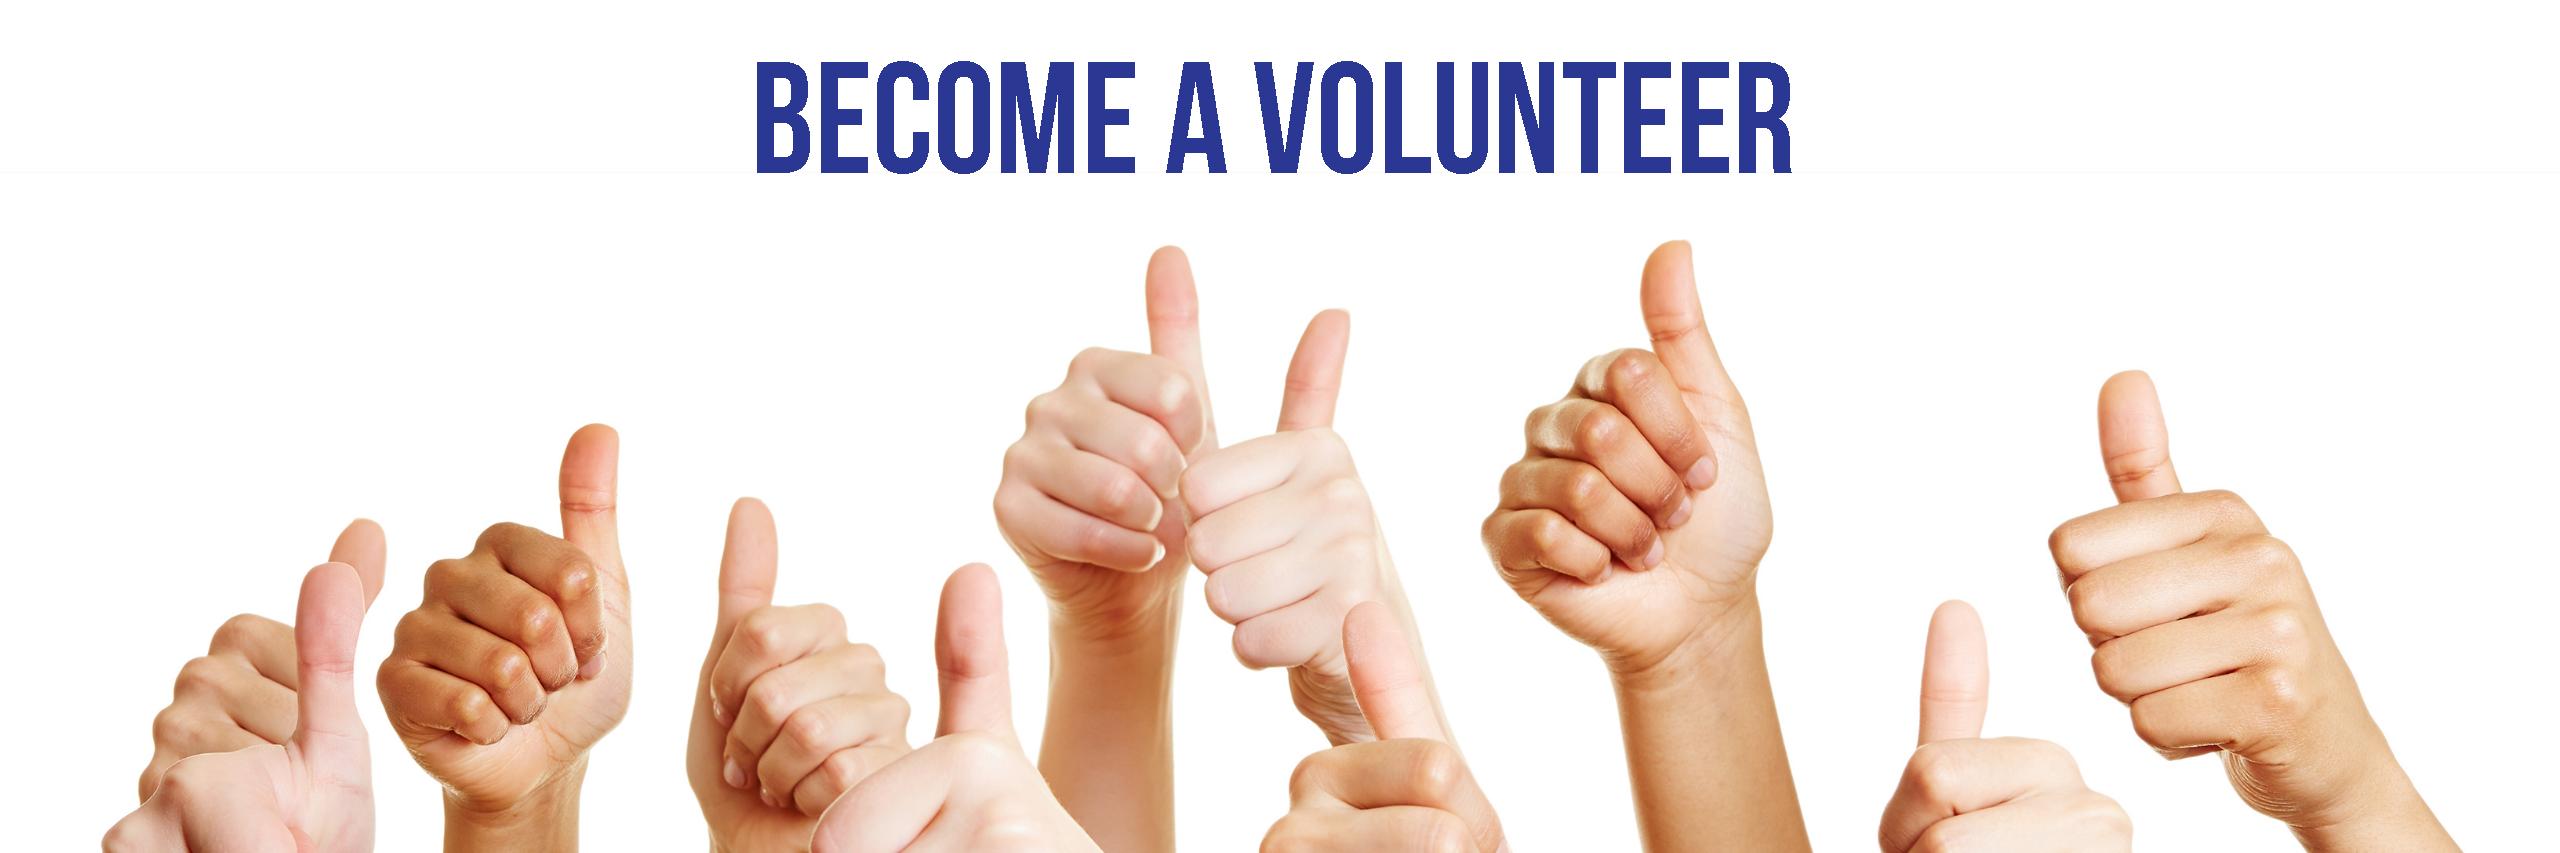 Become a Volunteer banner with multiple hands that have thumbs up.